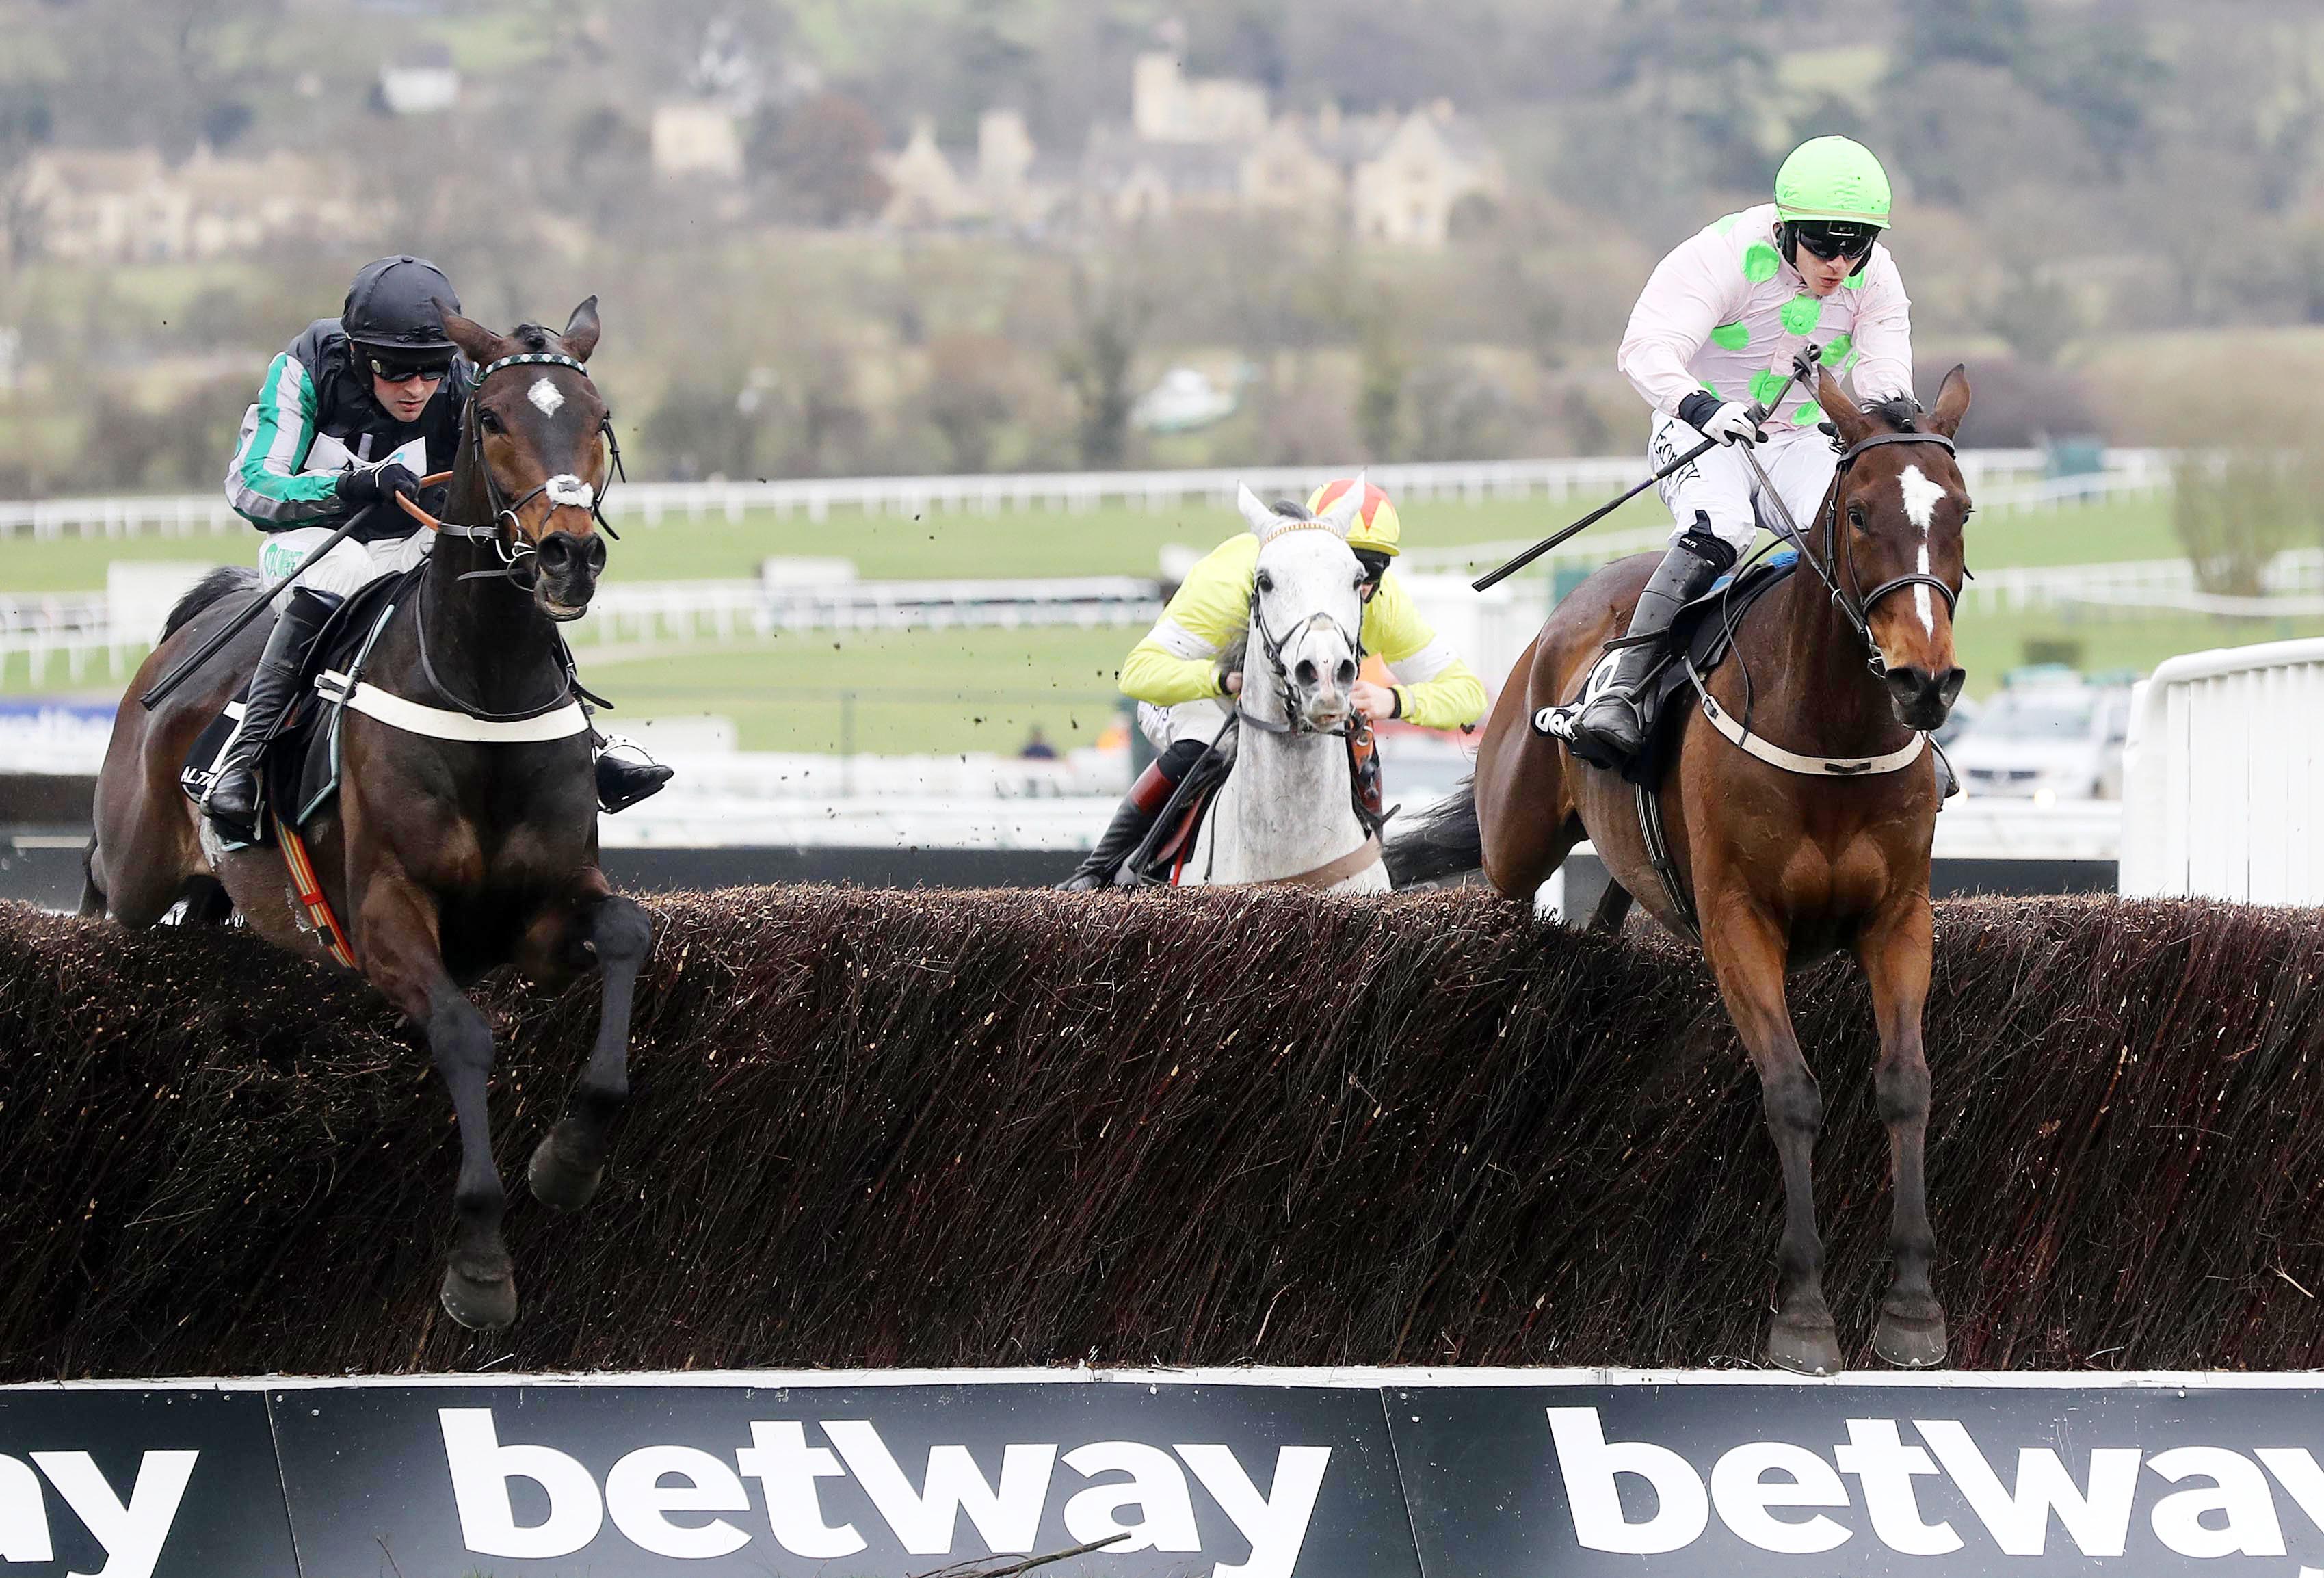 Altior goes for his 18th win on the bounce today and we think Min looks the only danger